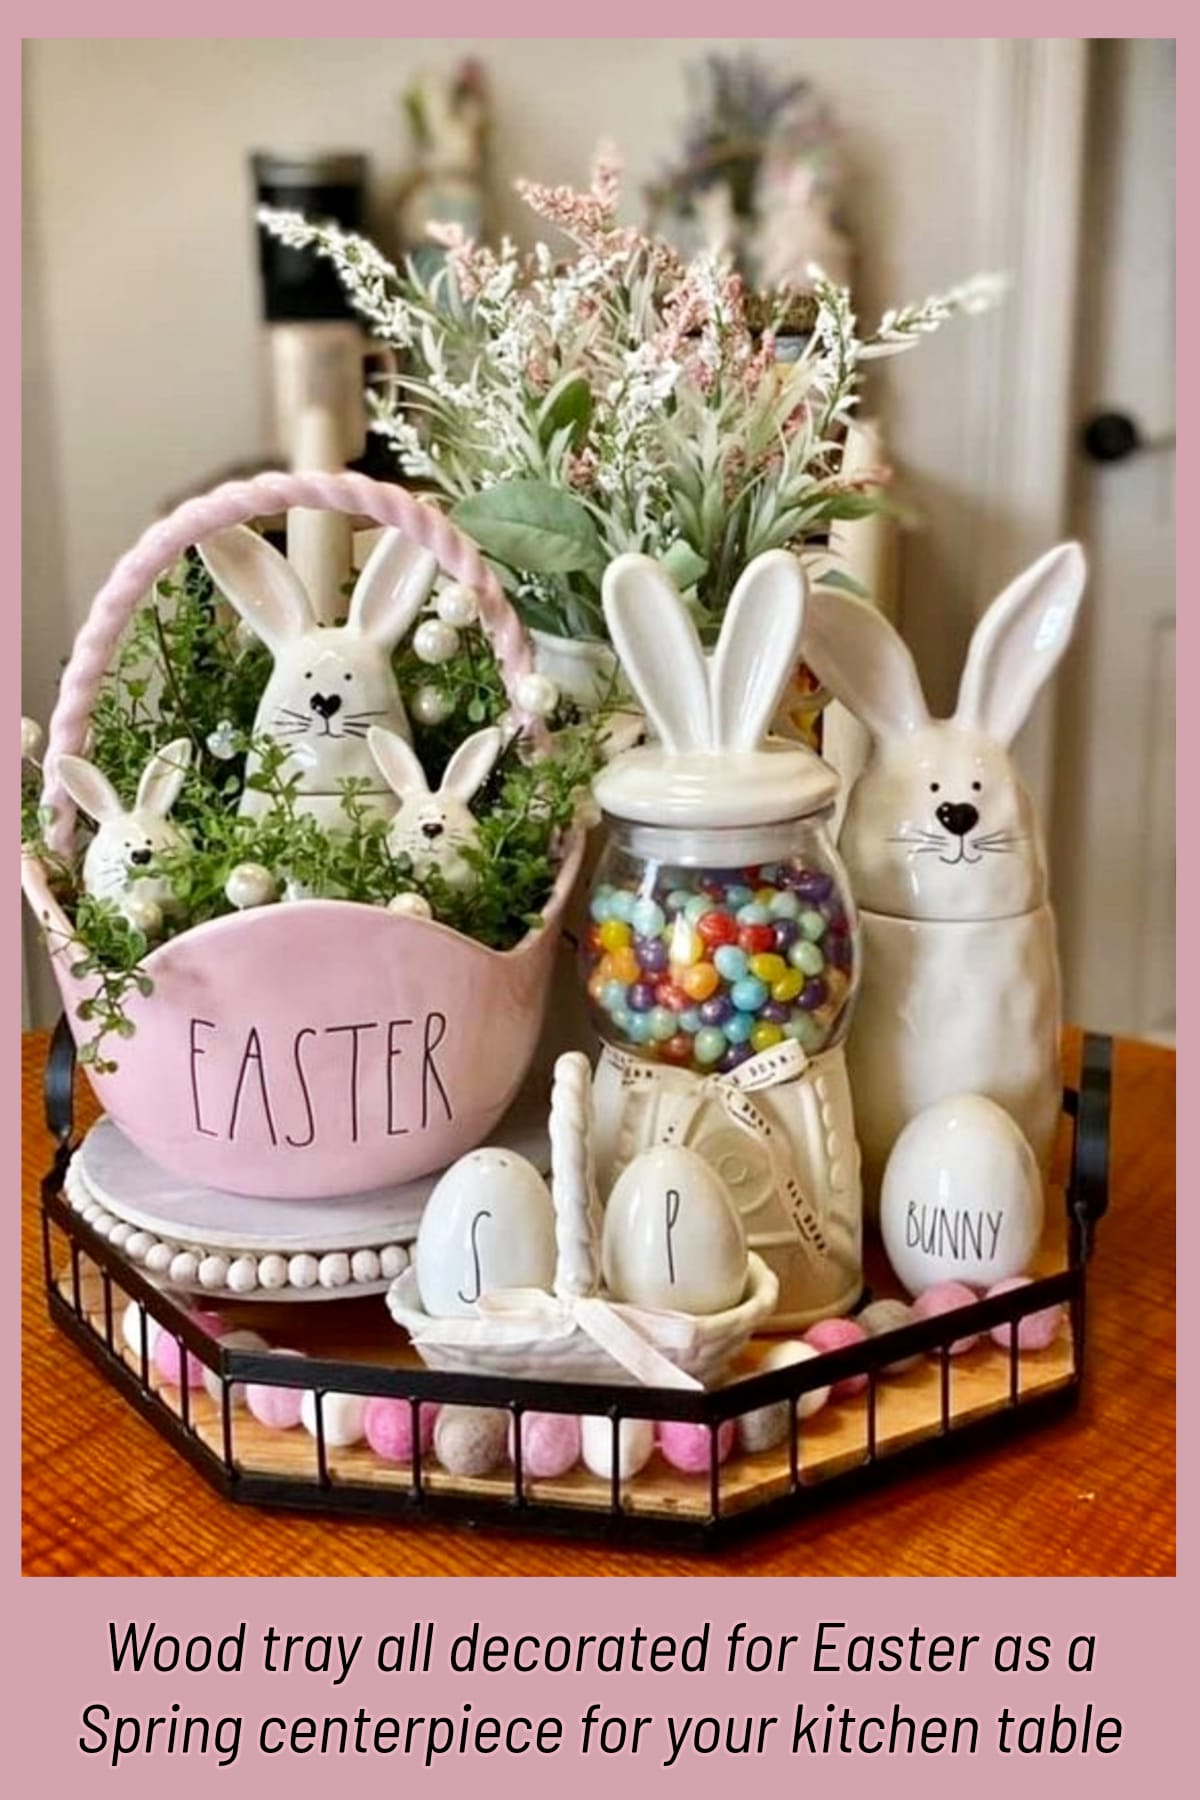 Wood tray Easter centerpiece decor ideas for Spring decorating - very cute wooden, tiered and metal tray decorations and decorating ideas for springtime